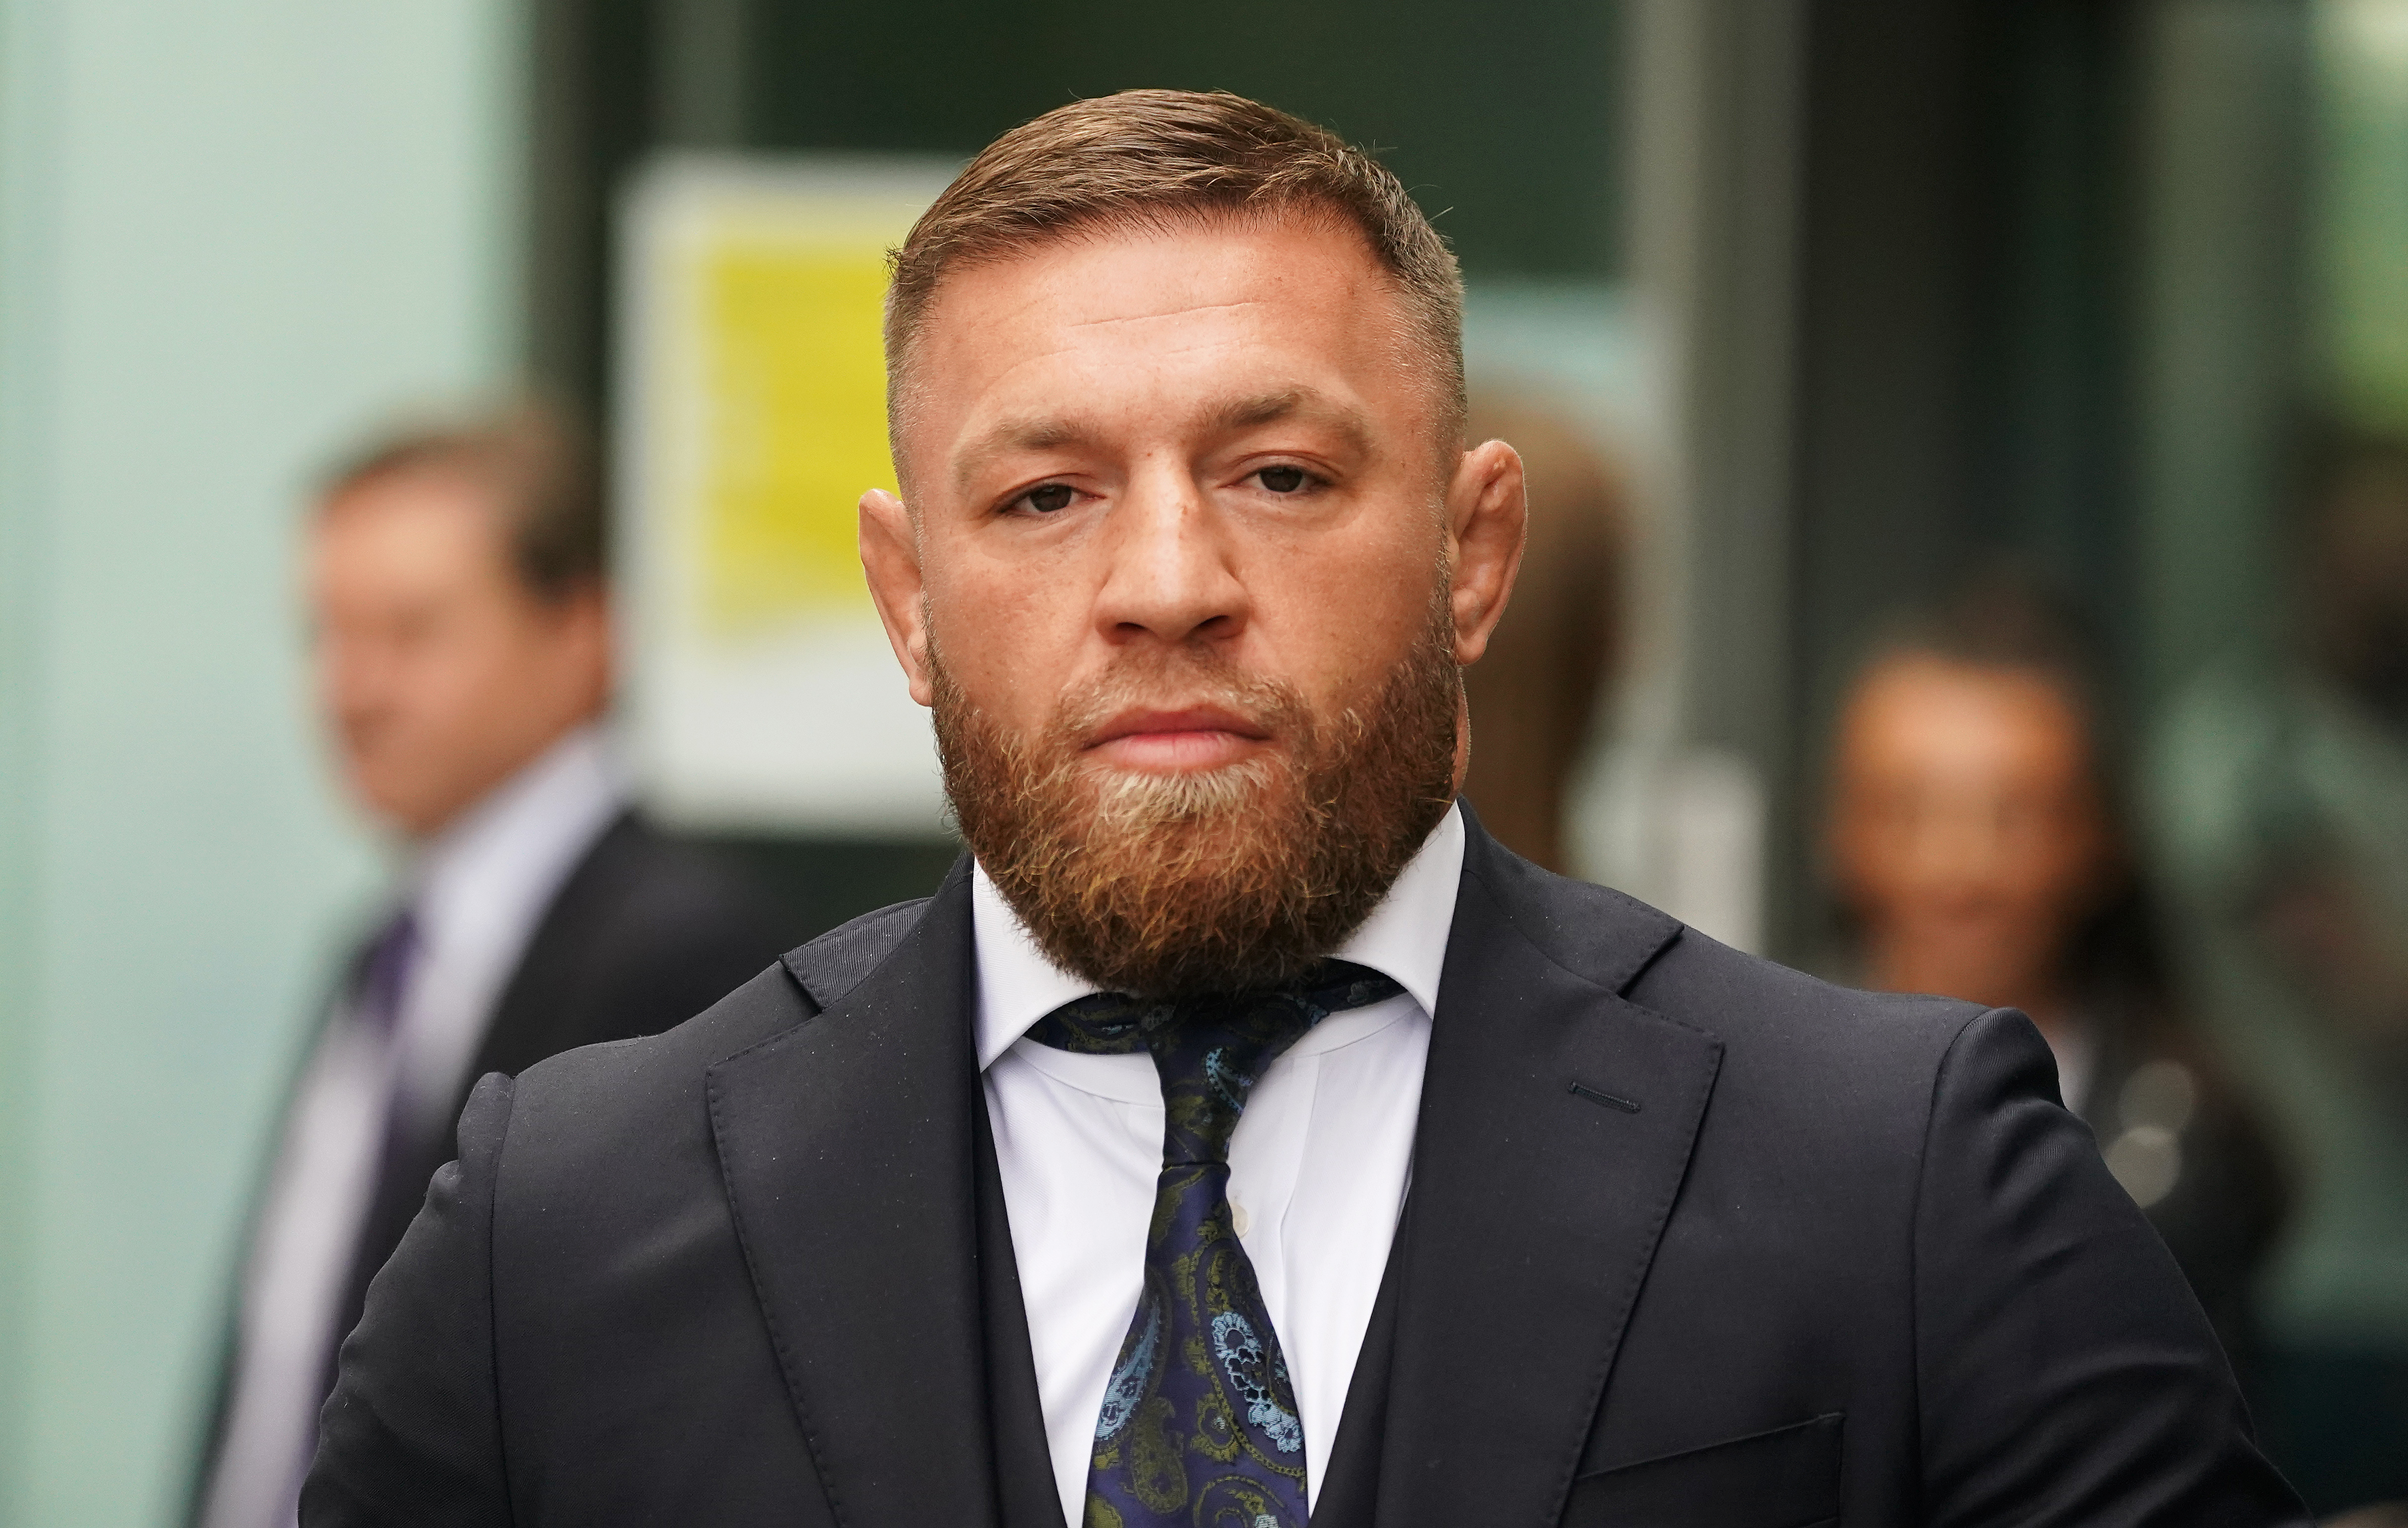 Conor McGregor leaving court over a driving offense.